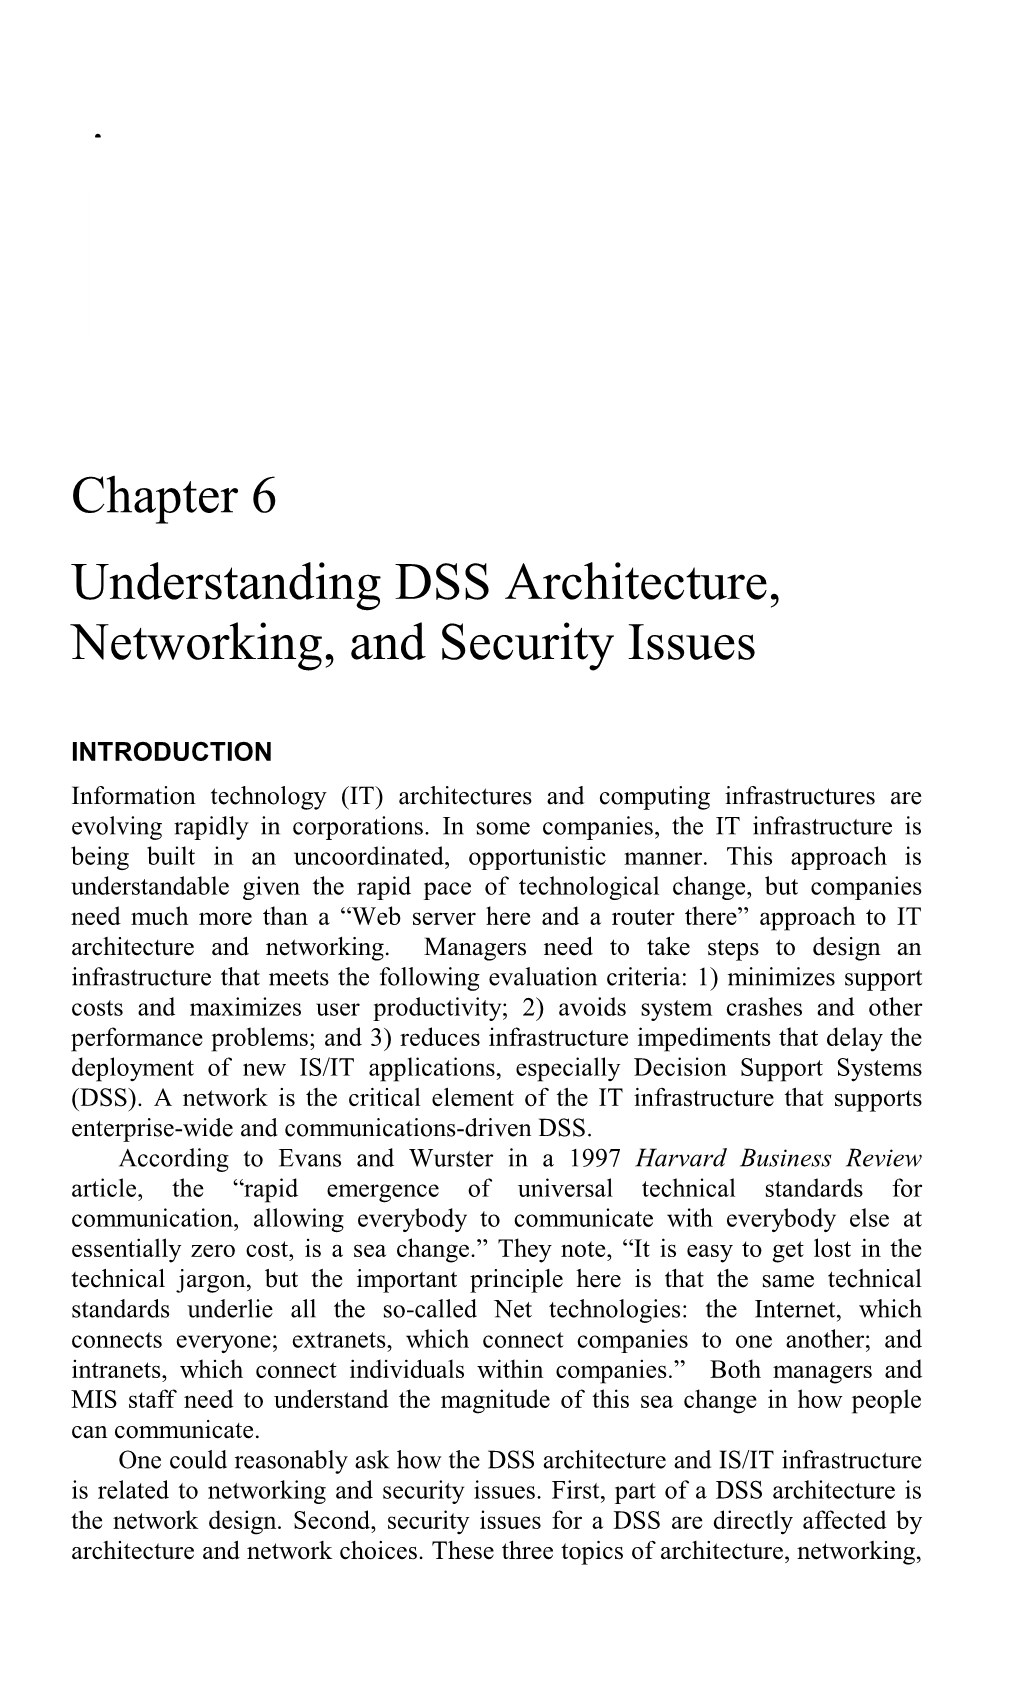 Chapter 6 Understanding DSS Architecture, Networking, And